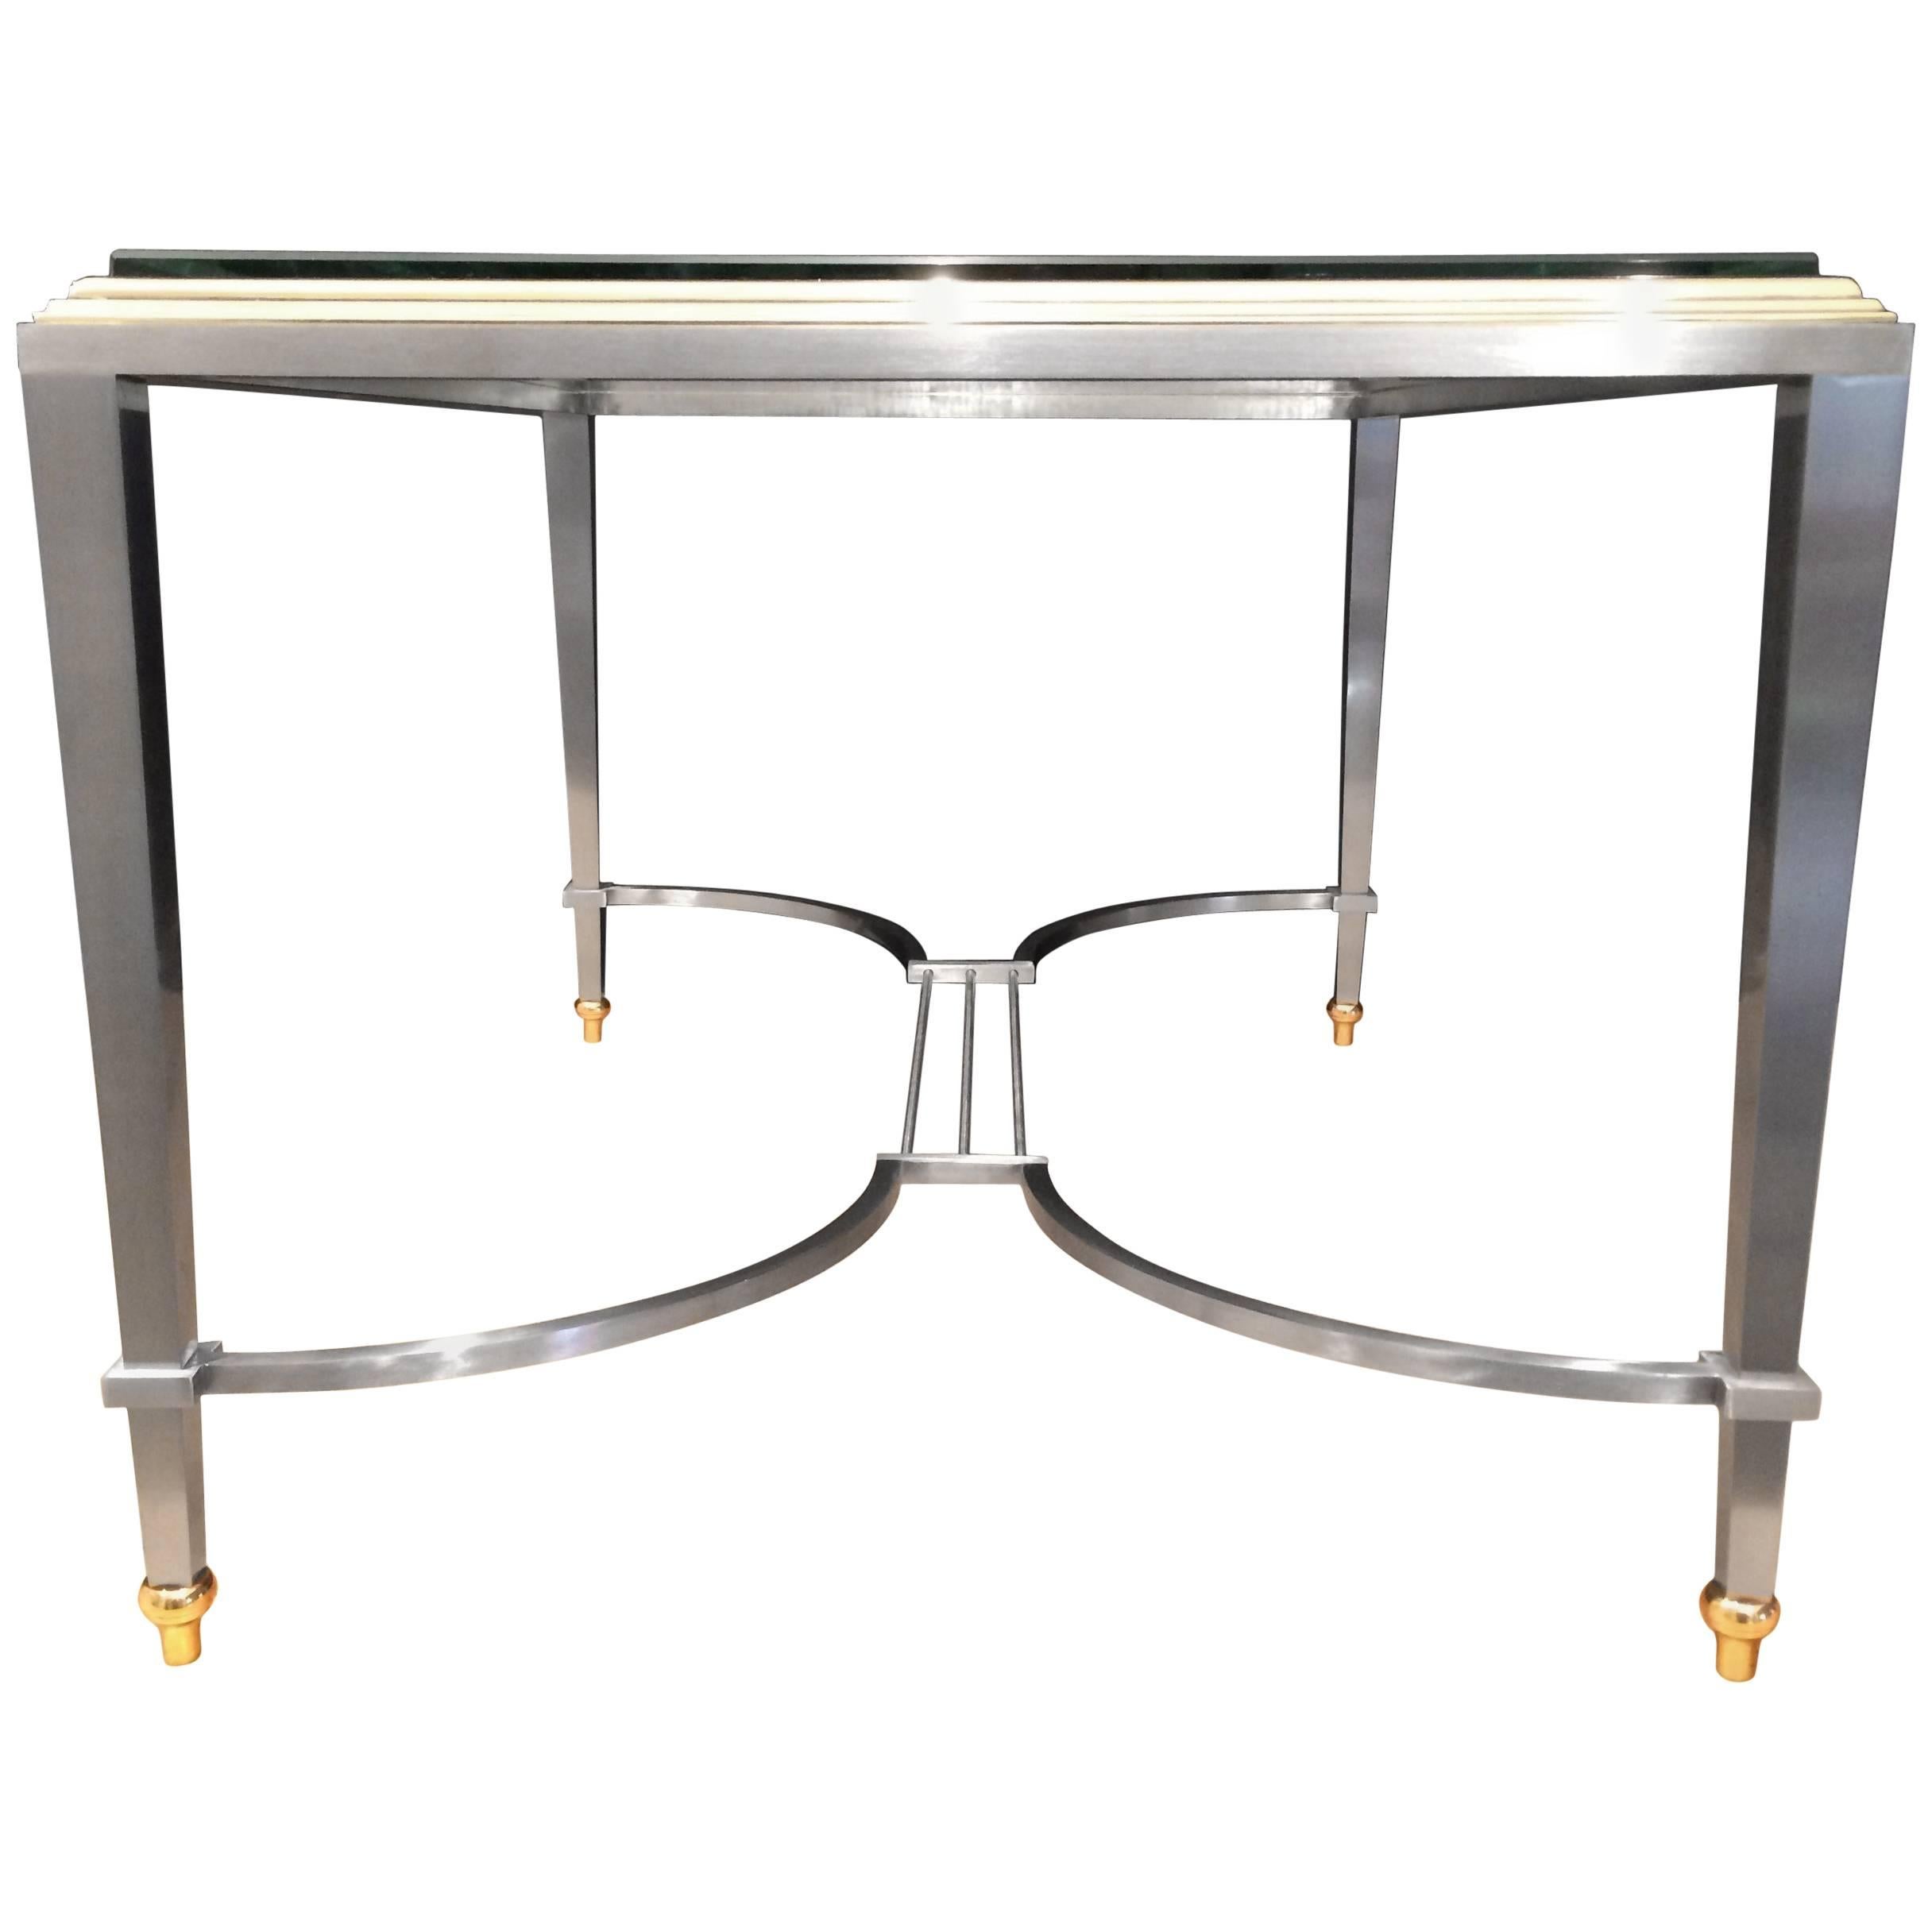 Italian Brass and Steel Coffee Table, 1950s For Sale